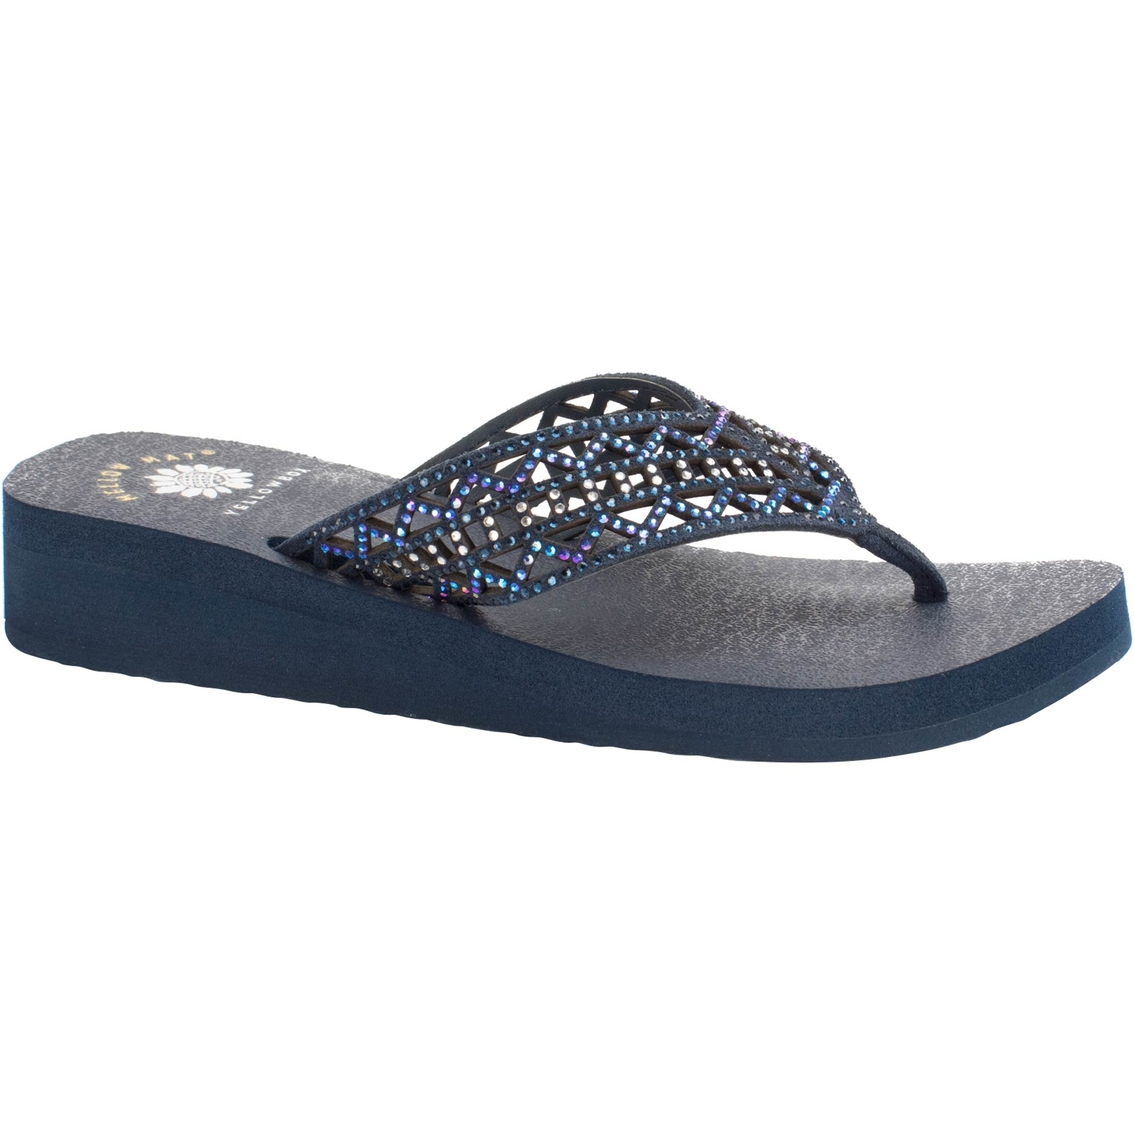 comfortable bling sandals